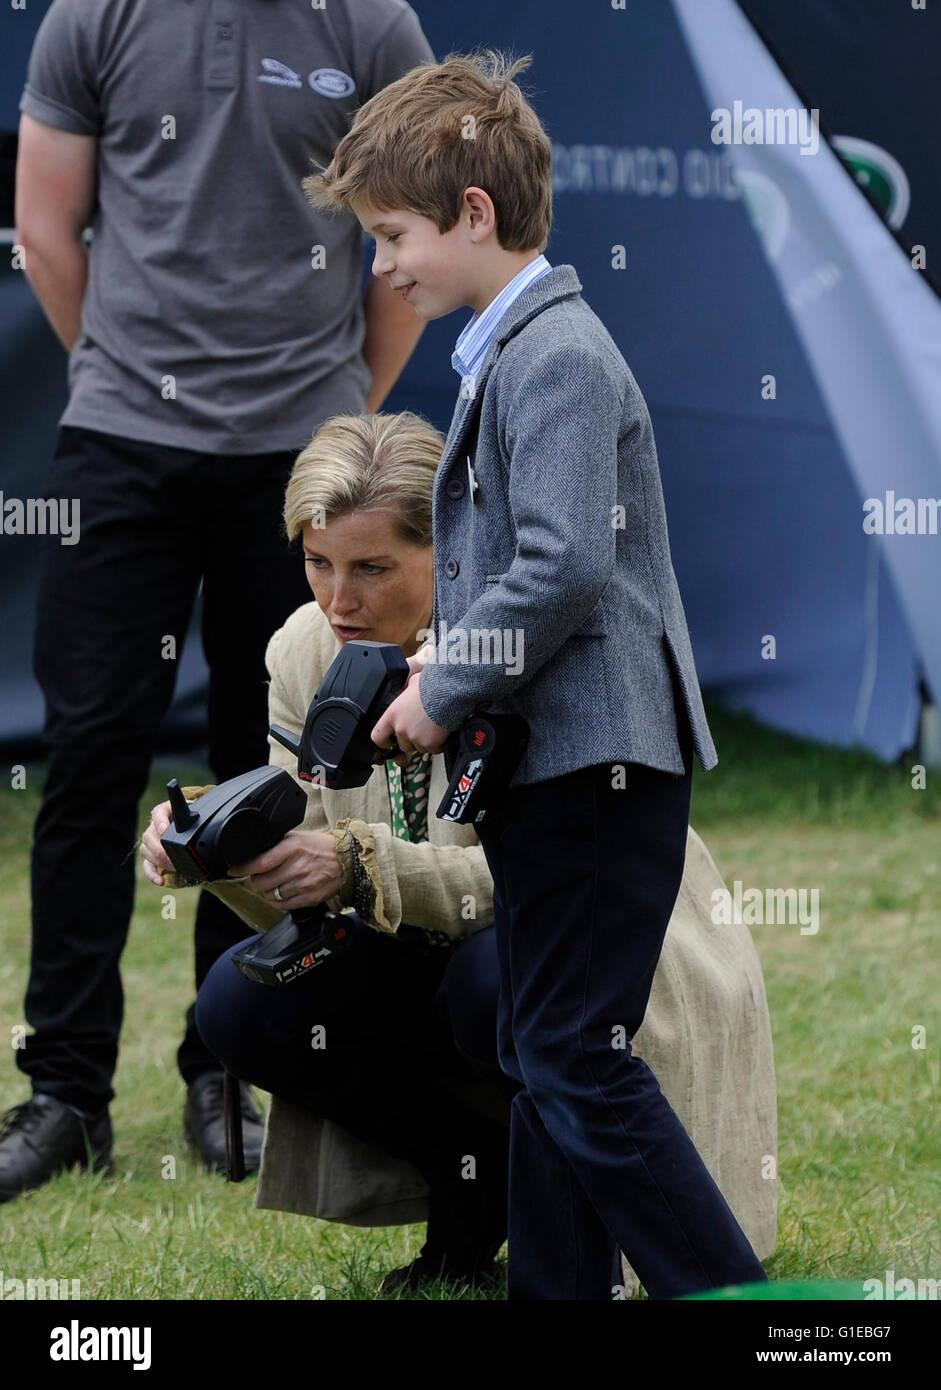 Windsor, Berkshire, UK. 14th May, 2016. The Royal Windsor Horse Show 2016. The Queen's 90th Birthday celebration. Windsor Castle. Windsor. HRH Sophie, Countess of Wessex with James, Viscount Severn. Driving the remote control land rovers at Windsor Great park Credit:  Julie Priestley/Alamy Live News Stock Photo